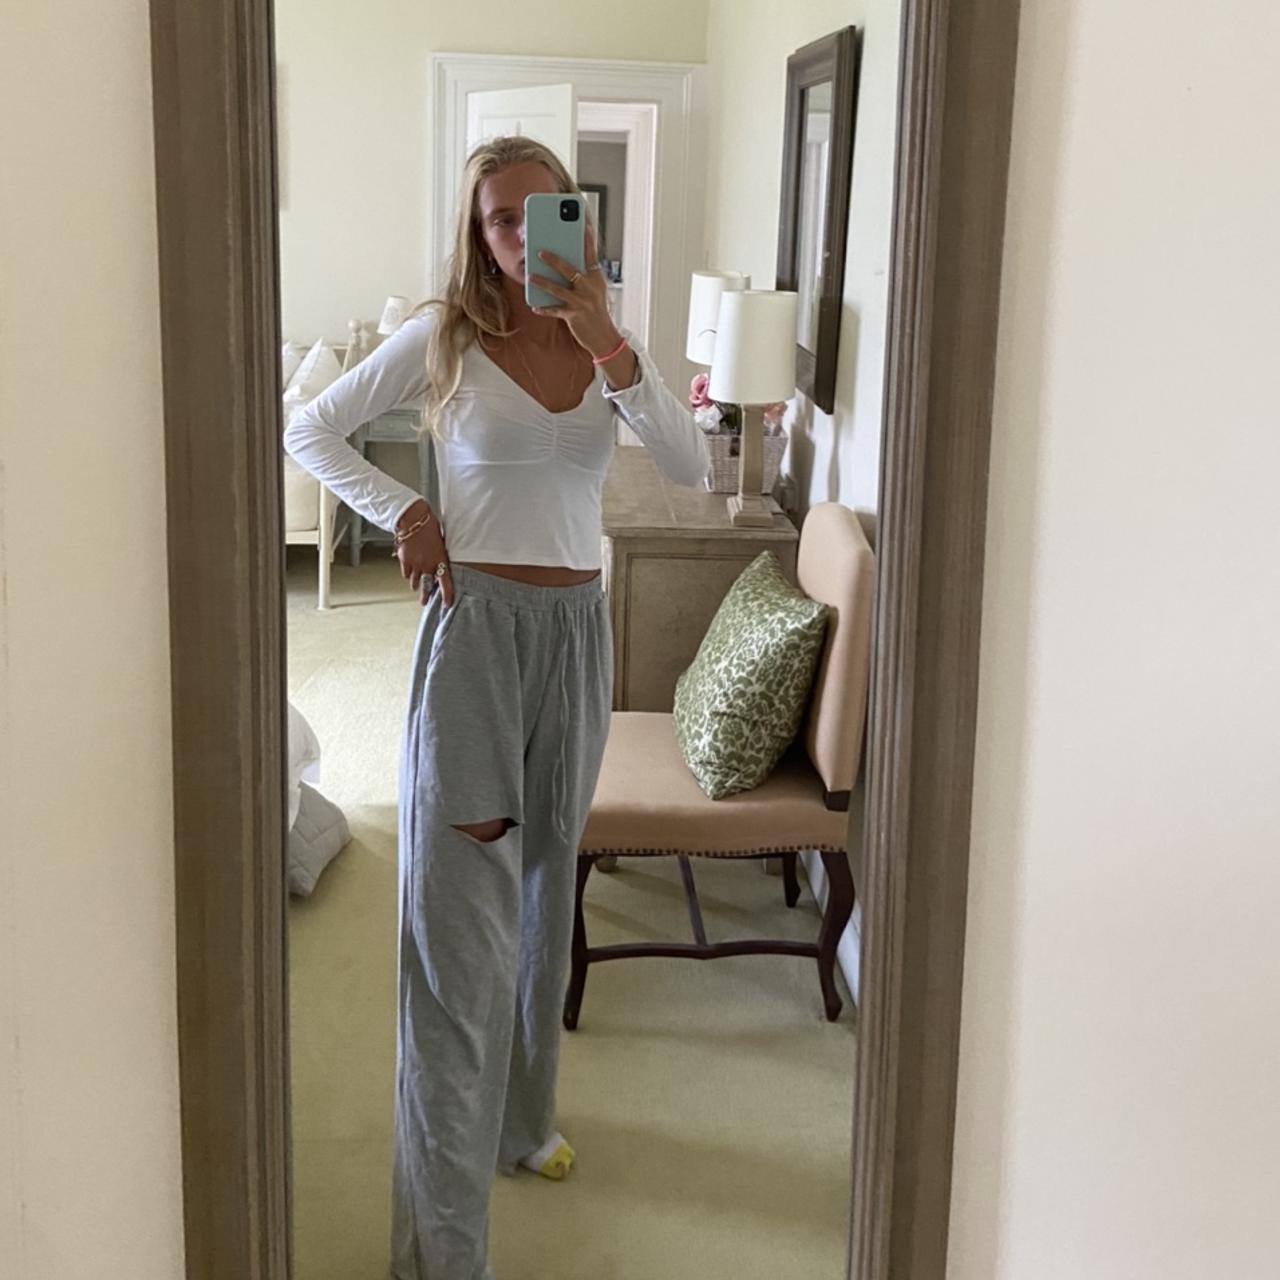 thrifted by natalie🌻 on Instagram: (ITEM SOLD!!) Light Grey Colsie  Sweatpants with Red Hearts •medium in women's (would fit S-M) •$7 +  shipping (SALE $5) •dm me to purchase or if you